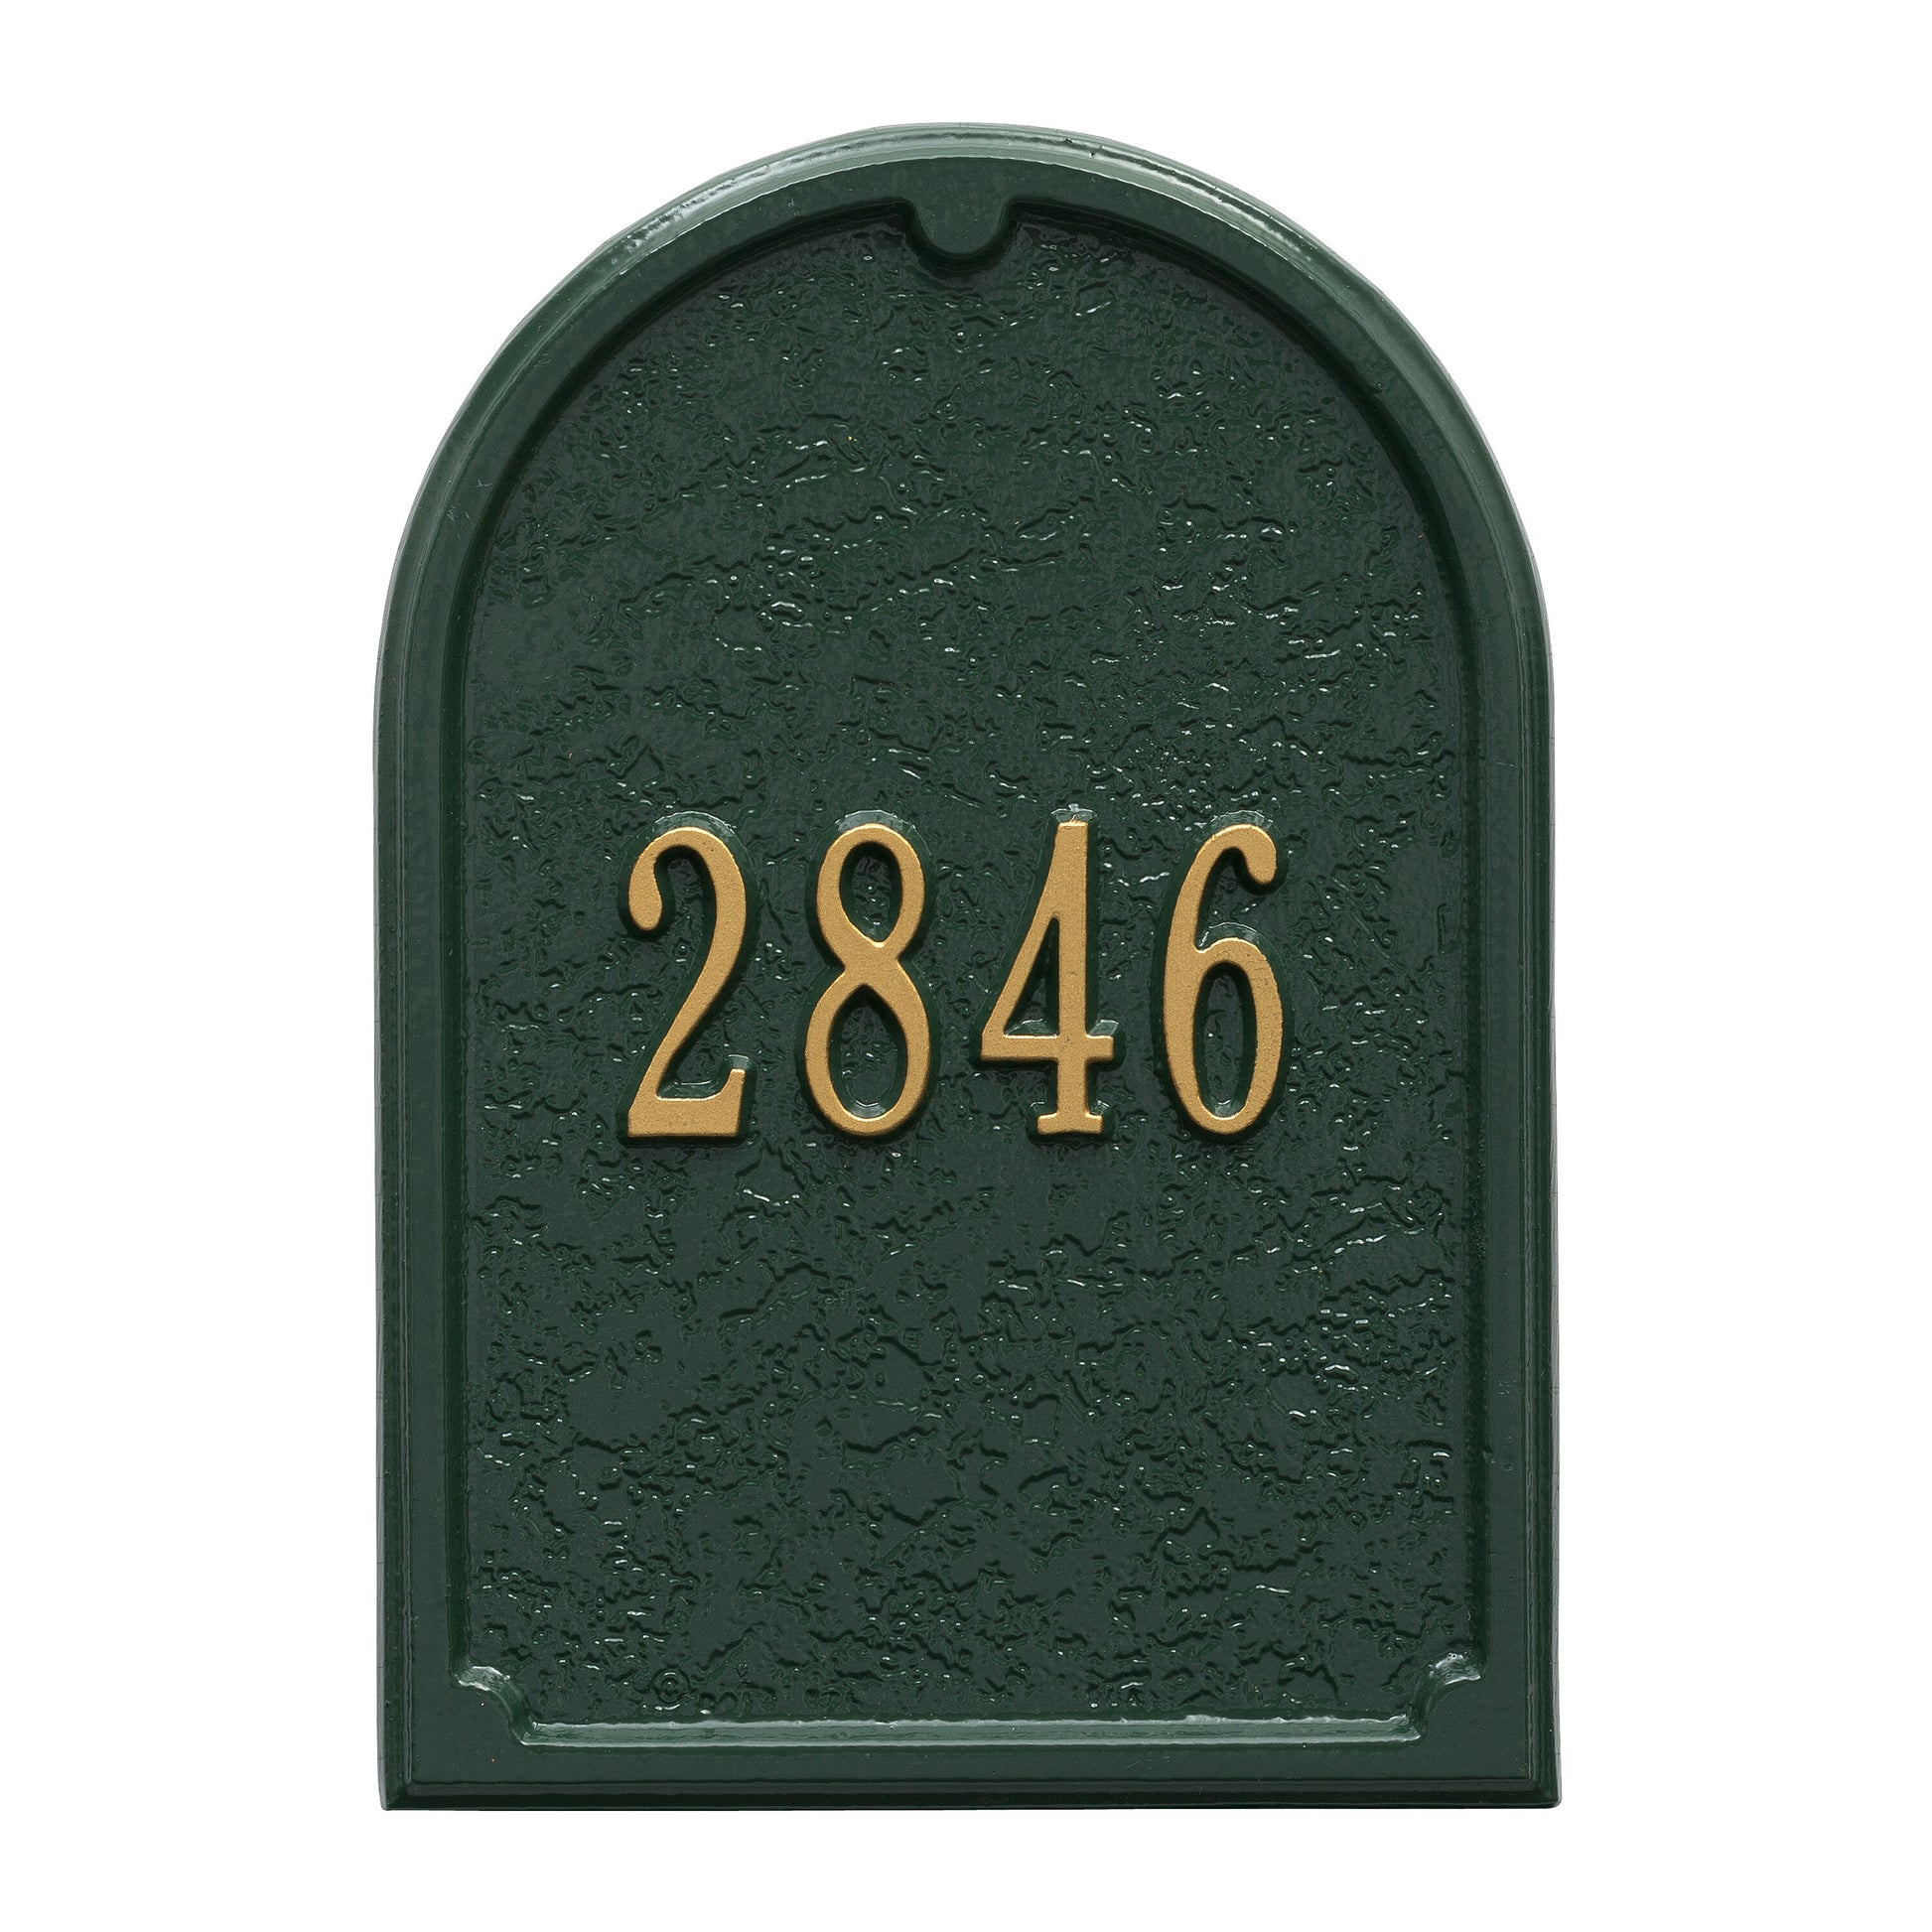 Whitehall Products Personalized Mailbox Door Personalized Door Plaque 